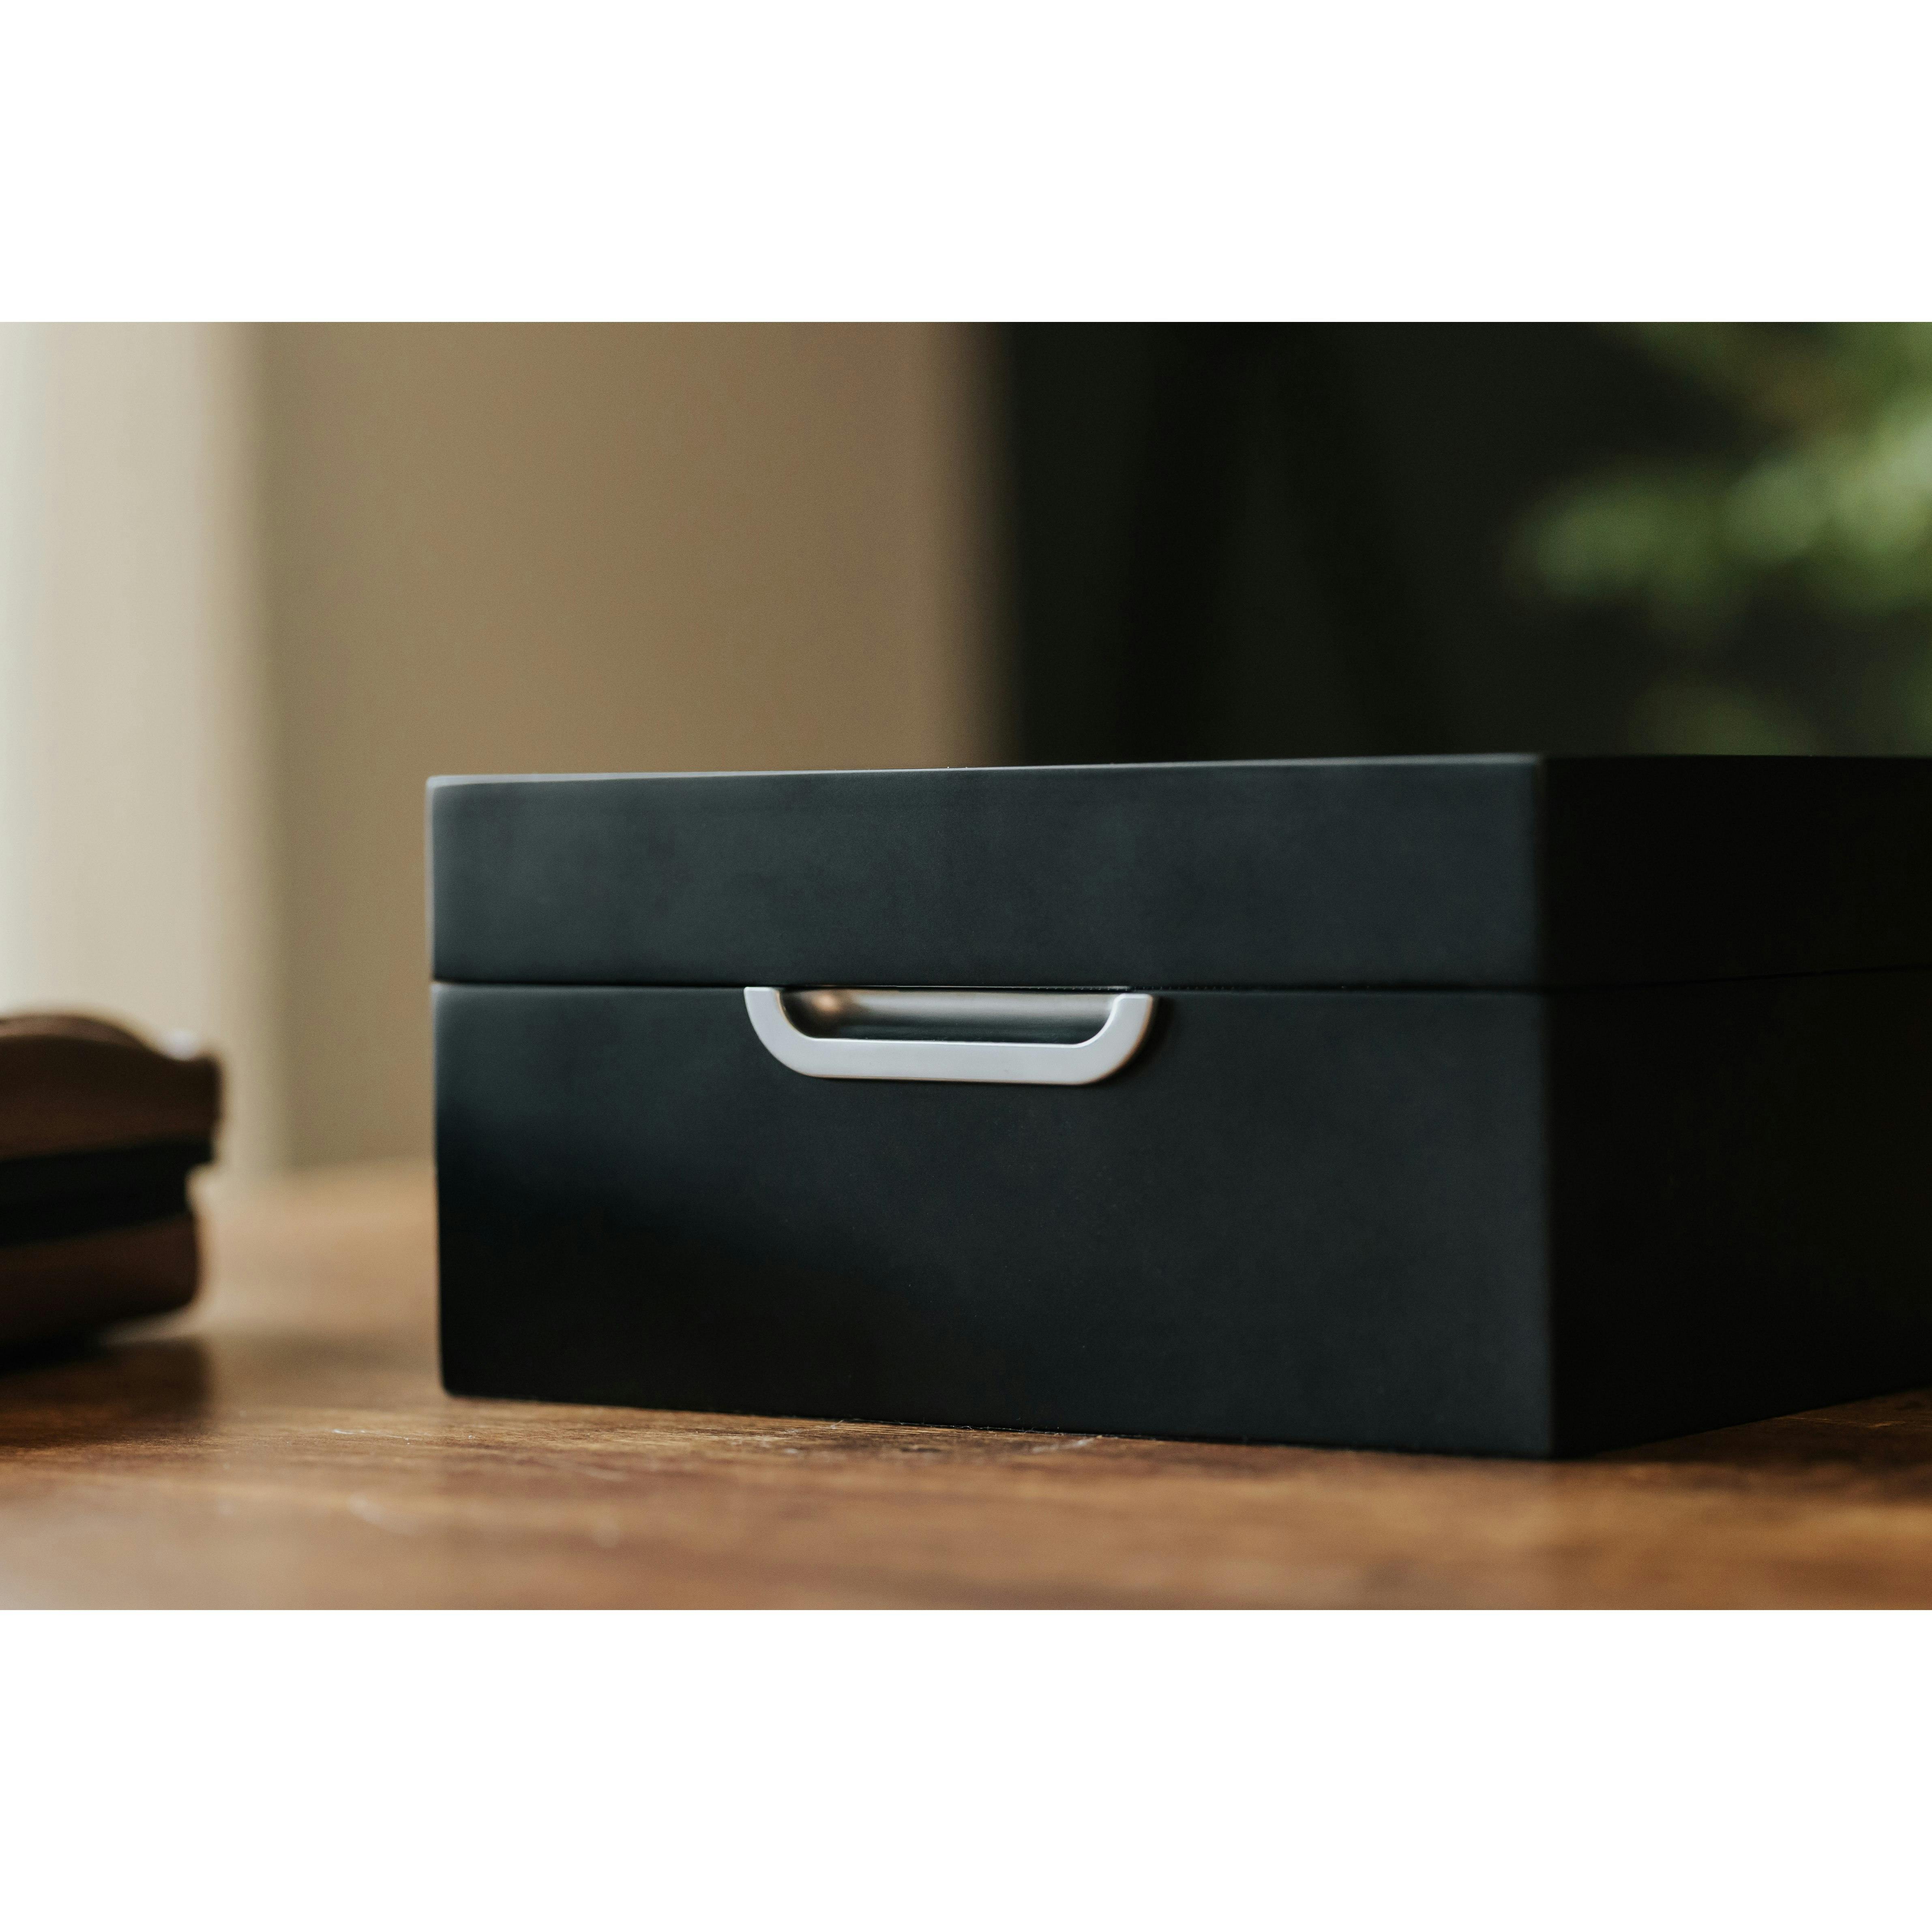 Modern Watch Box 2x3 Black Finish with Custom Aluminum Handle 6-Slot with Real Glass, Adult Unisex, Size: Large